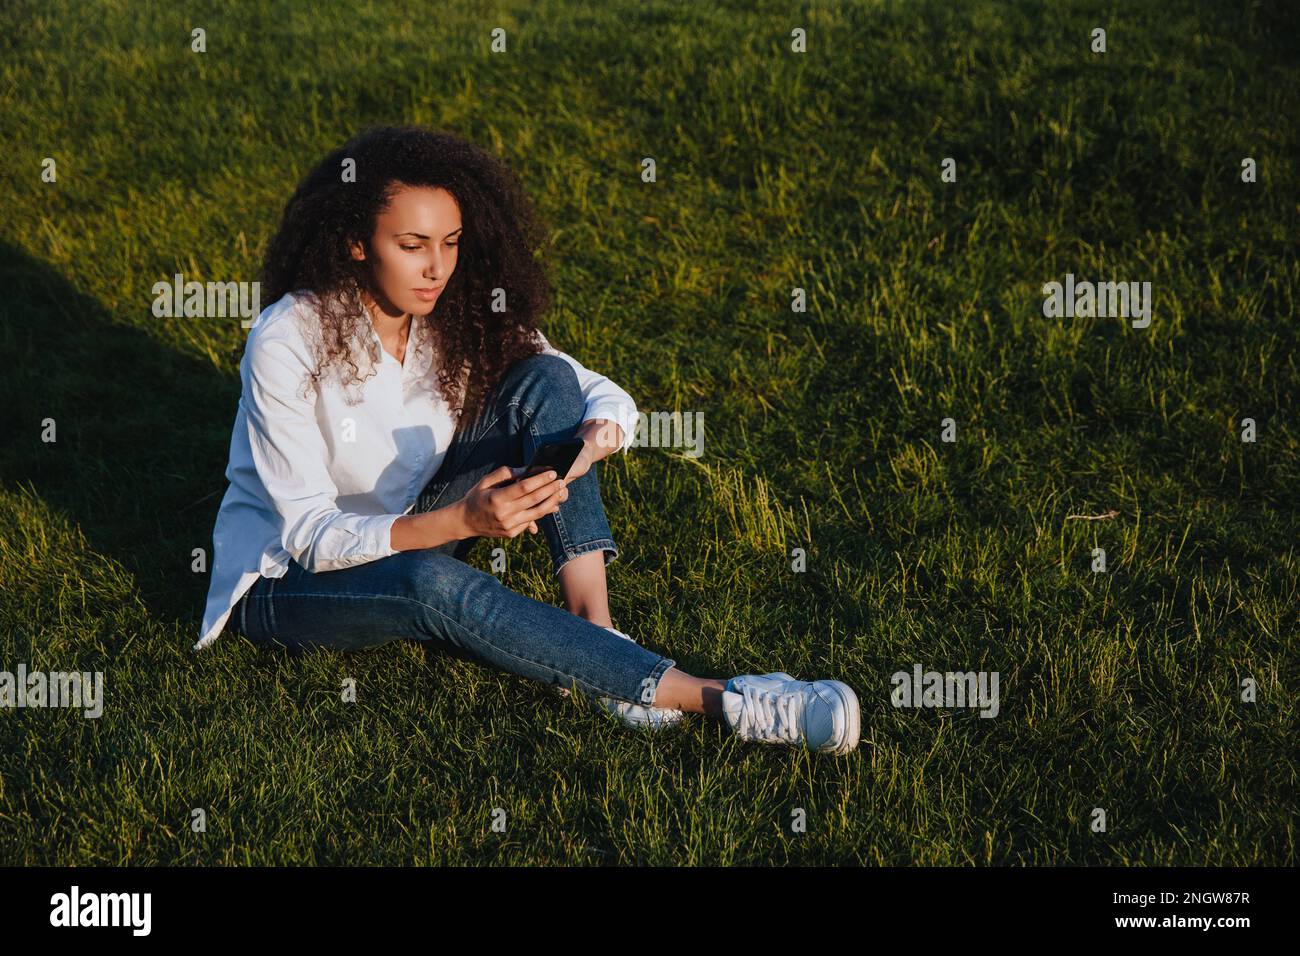 A young girl sits on the green grass in the park and uses social networks using a mobile phone. Stock Photo